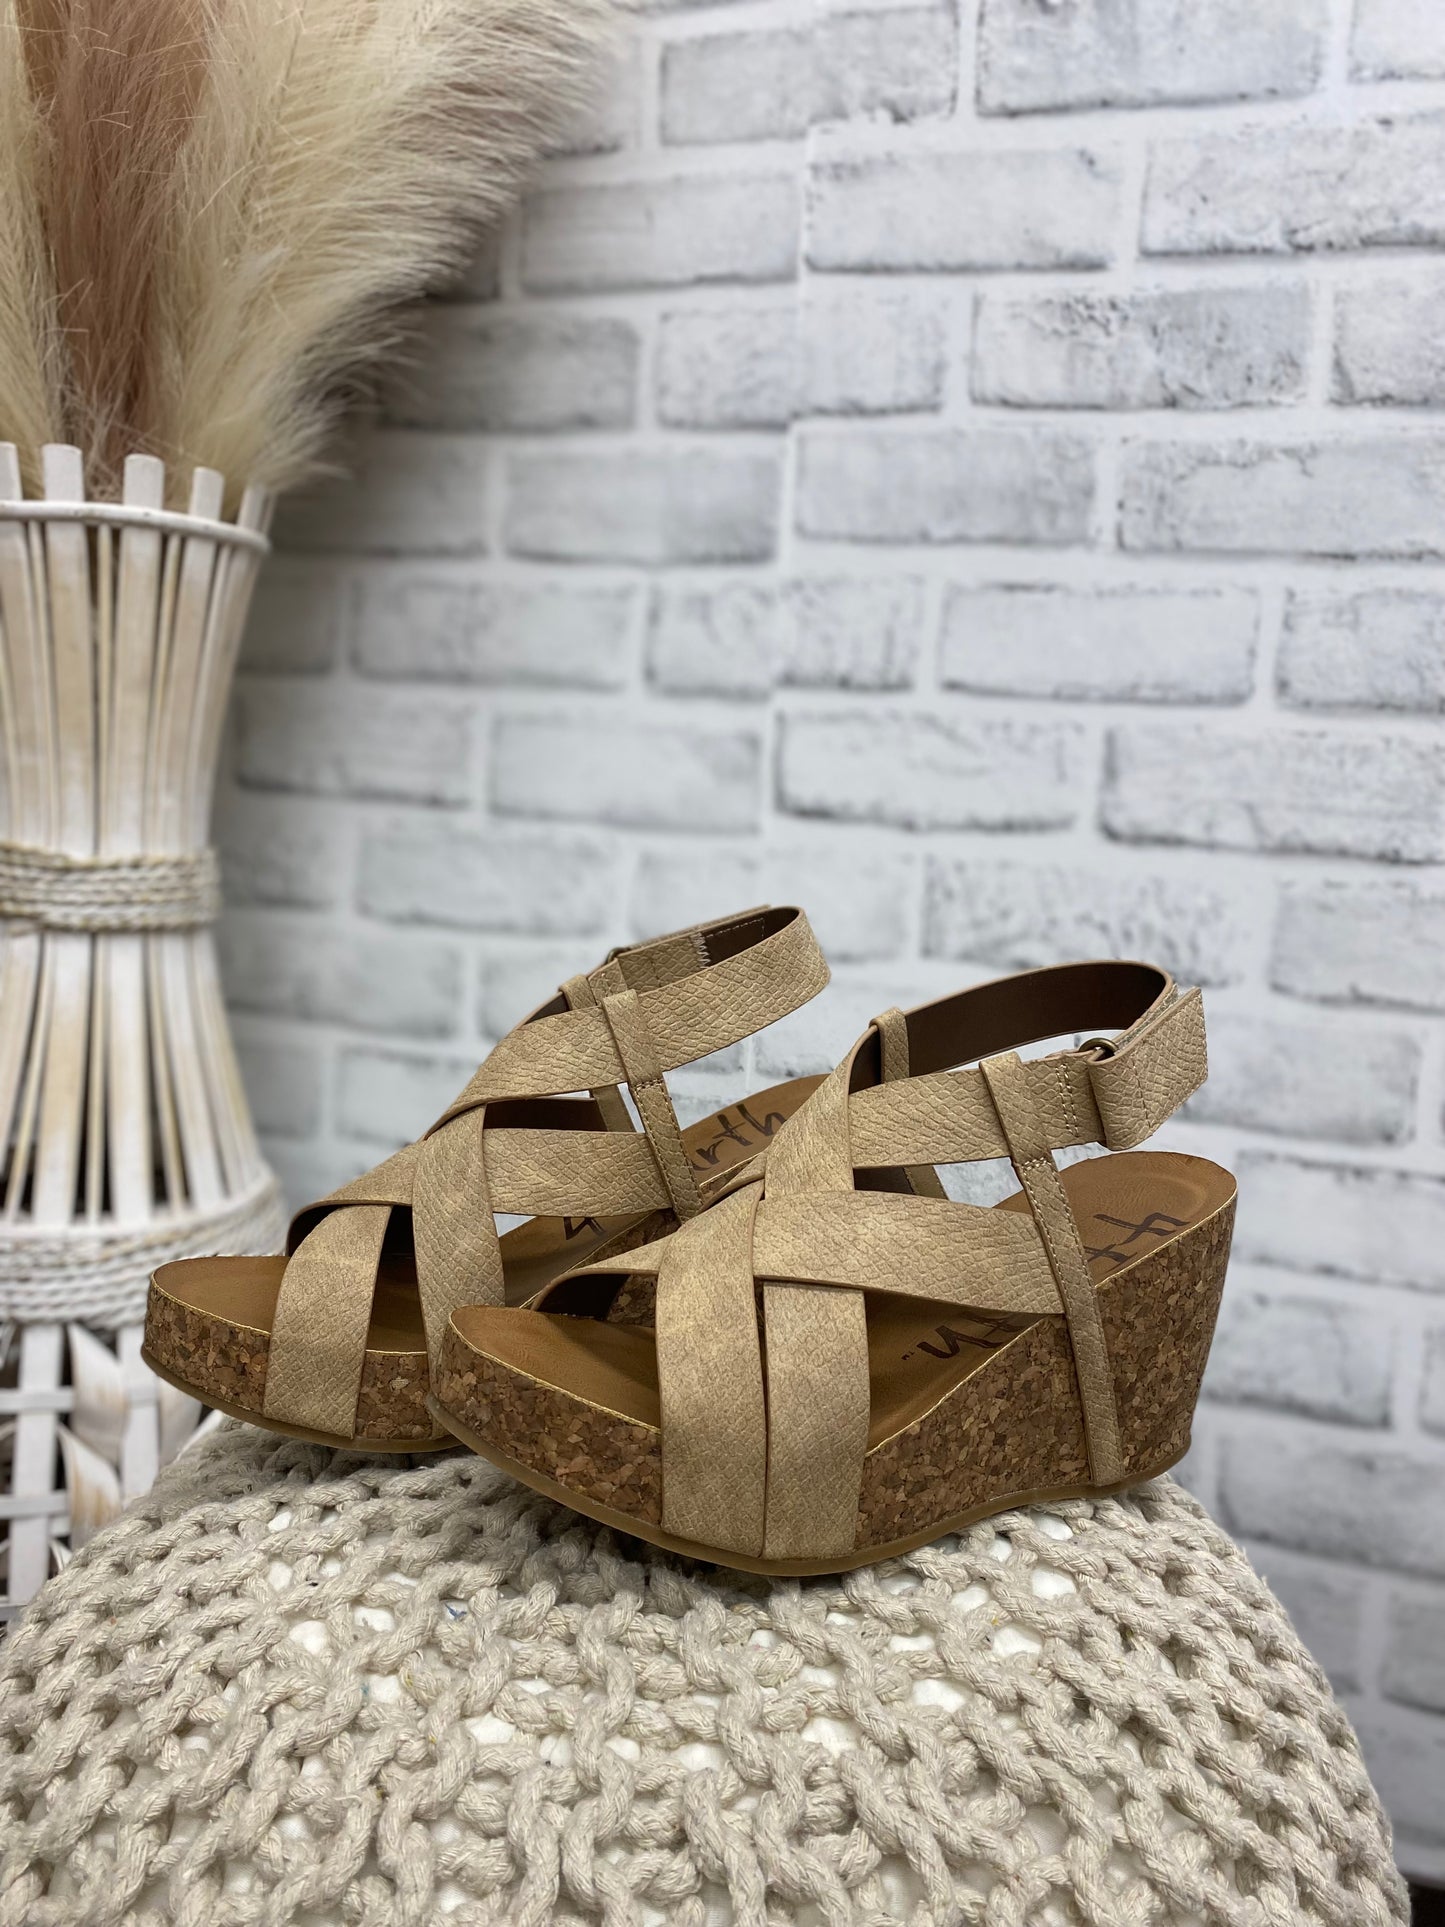 The Roxy Stone Sandals By Blowfish